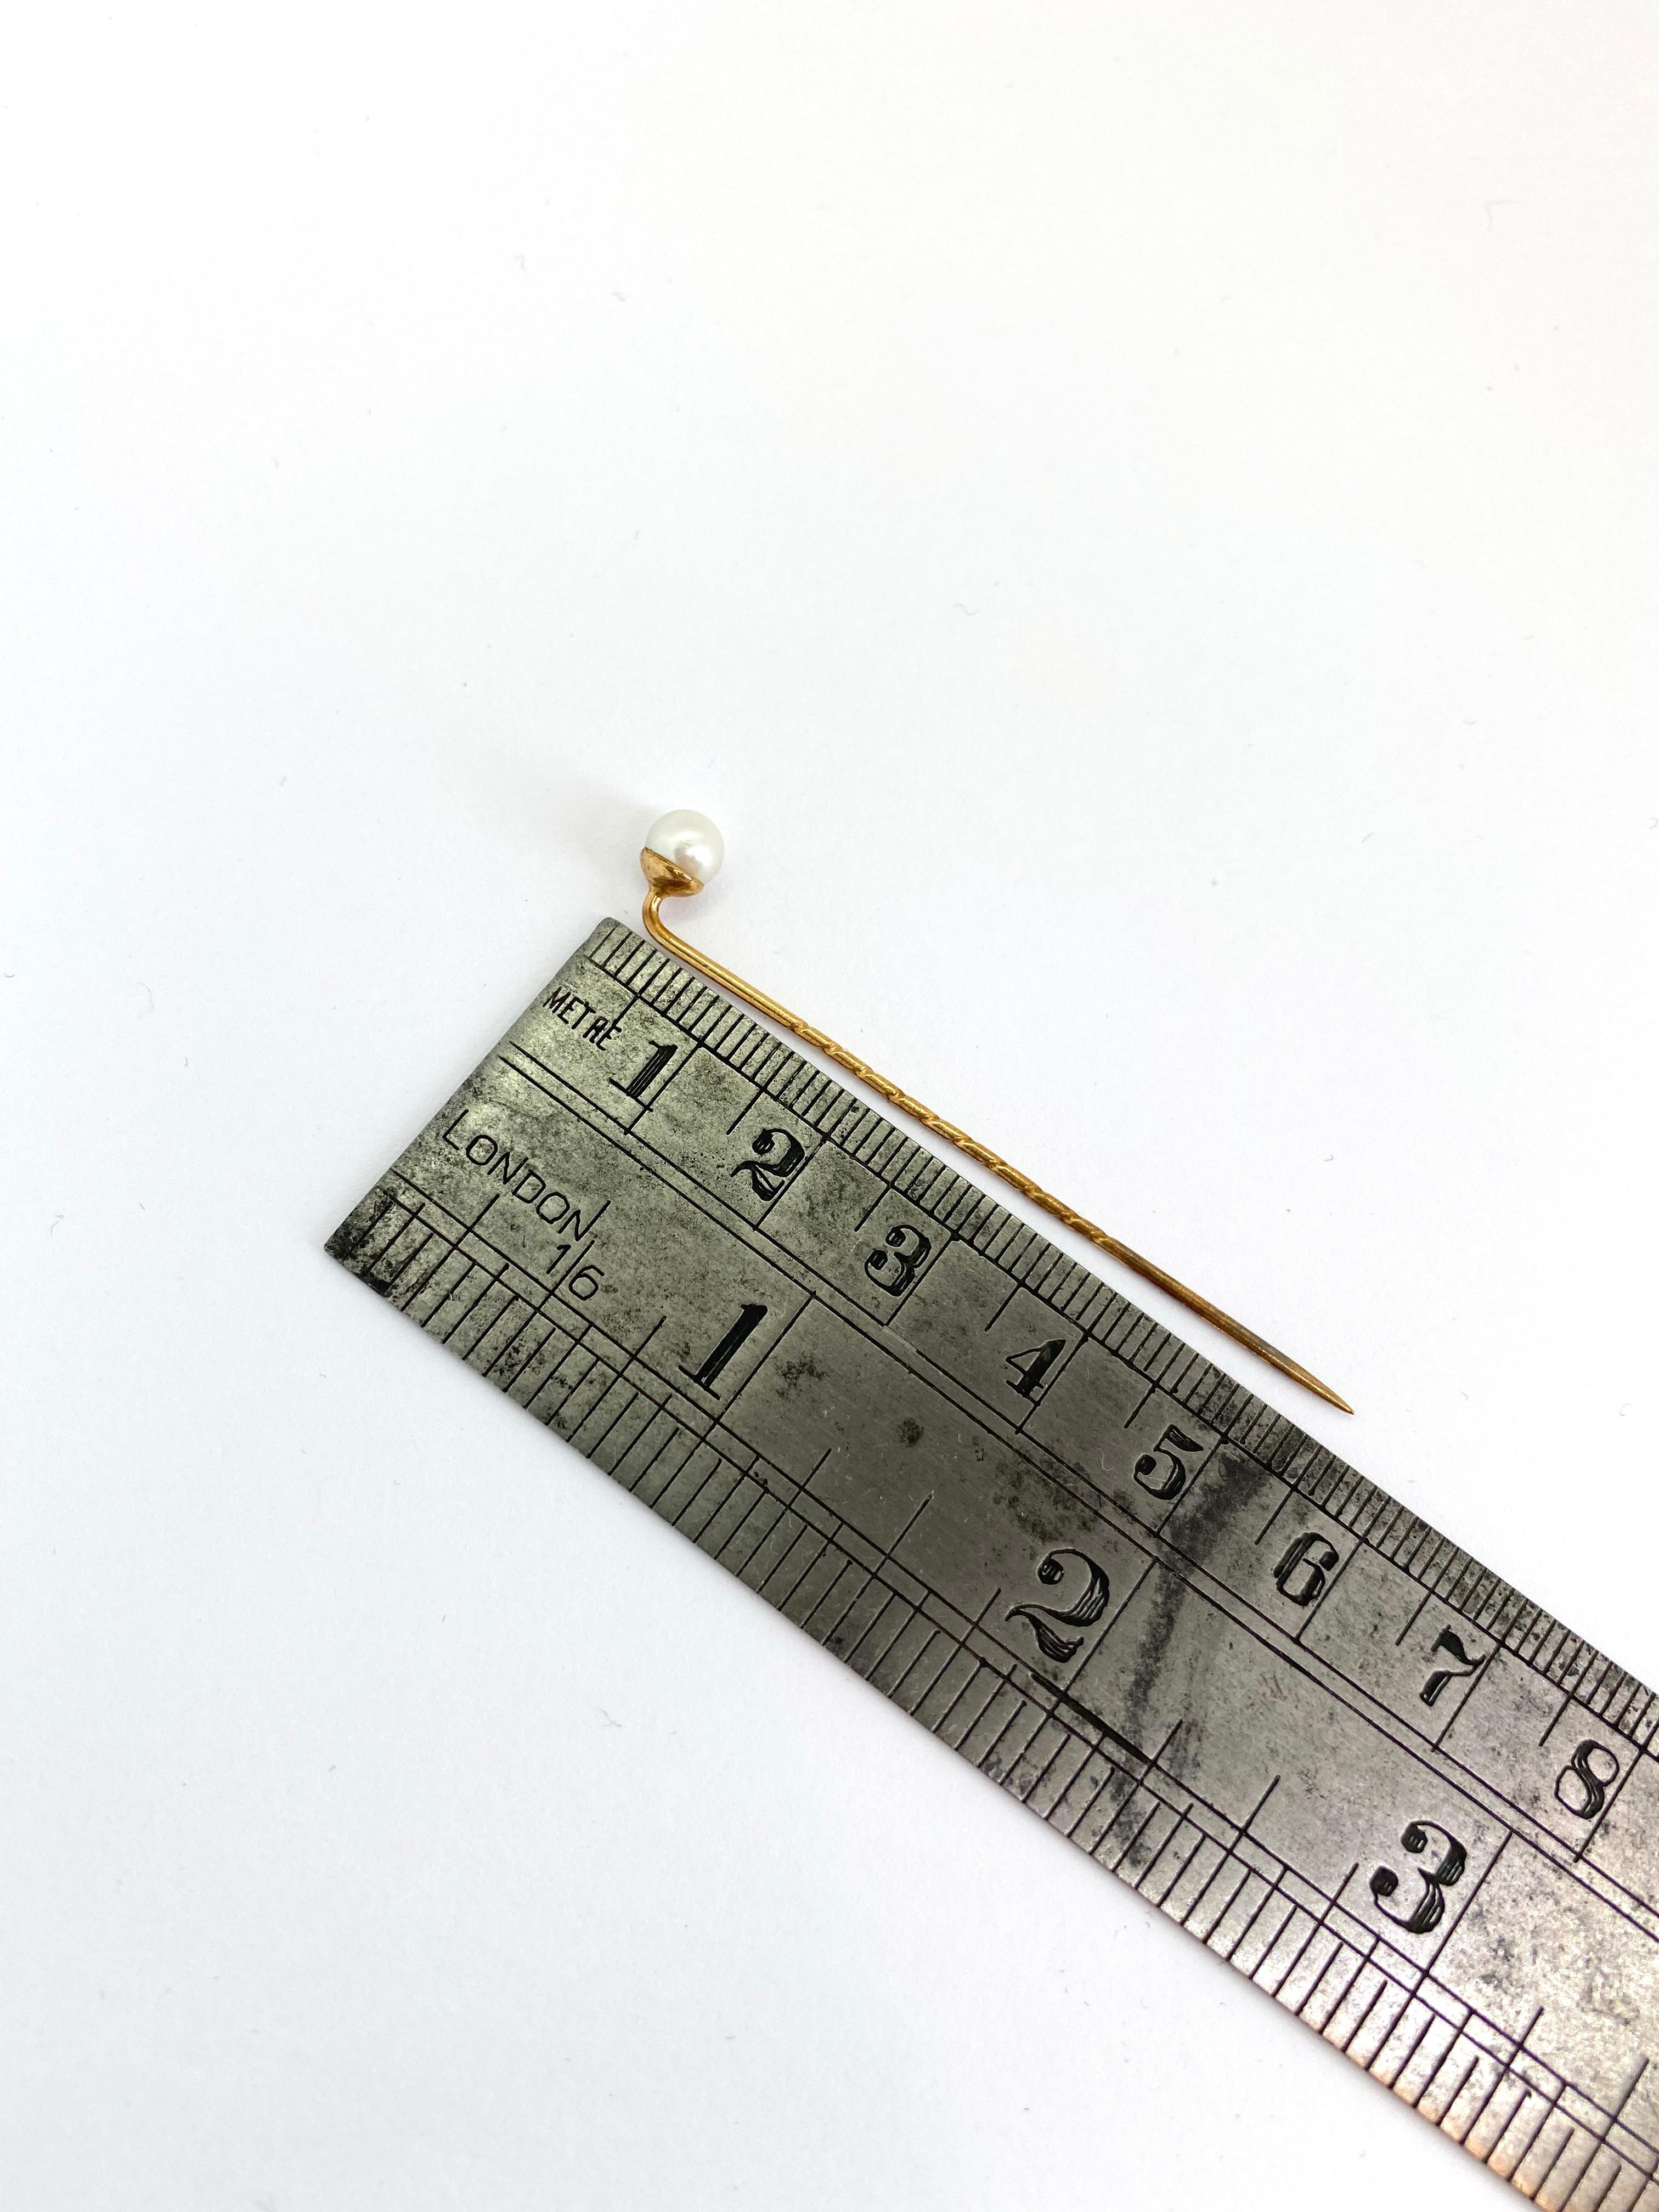 Stickpin Gold and Pearl
Made in Finland
585,stamp= 14 karat gold.
